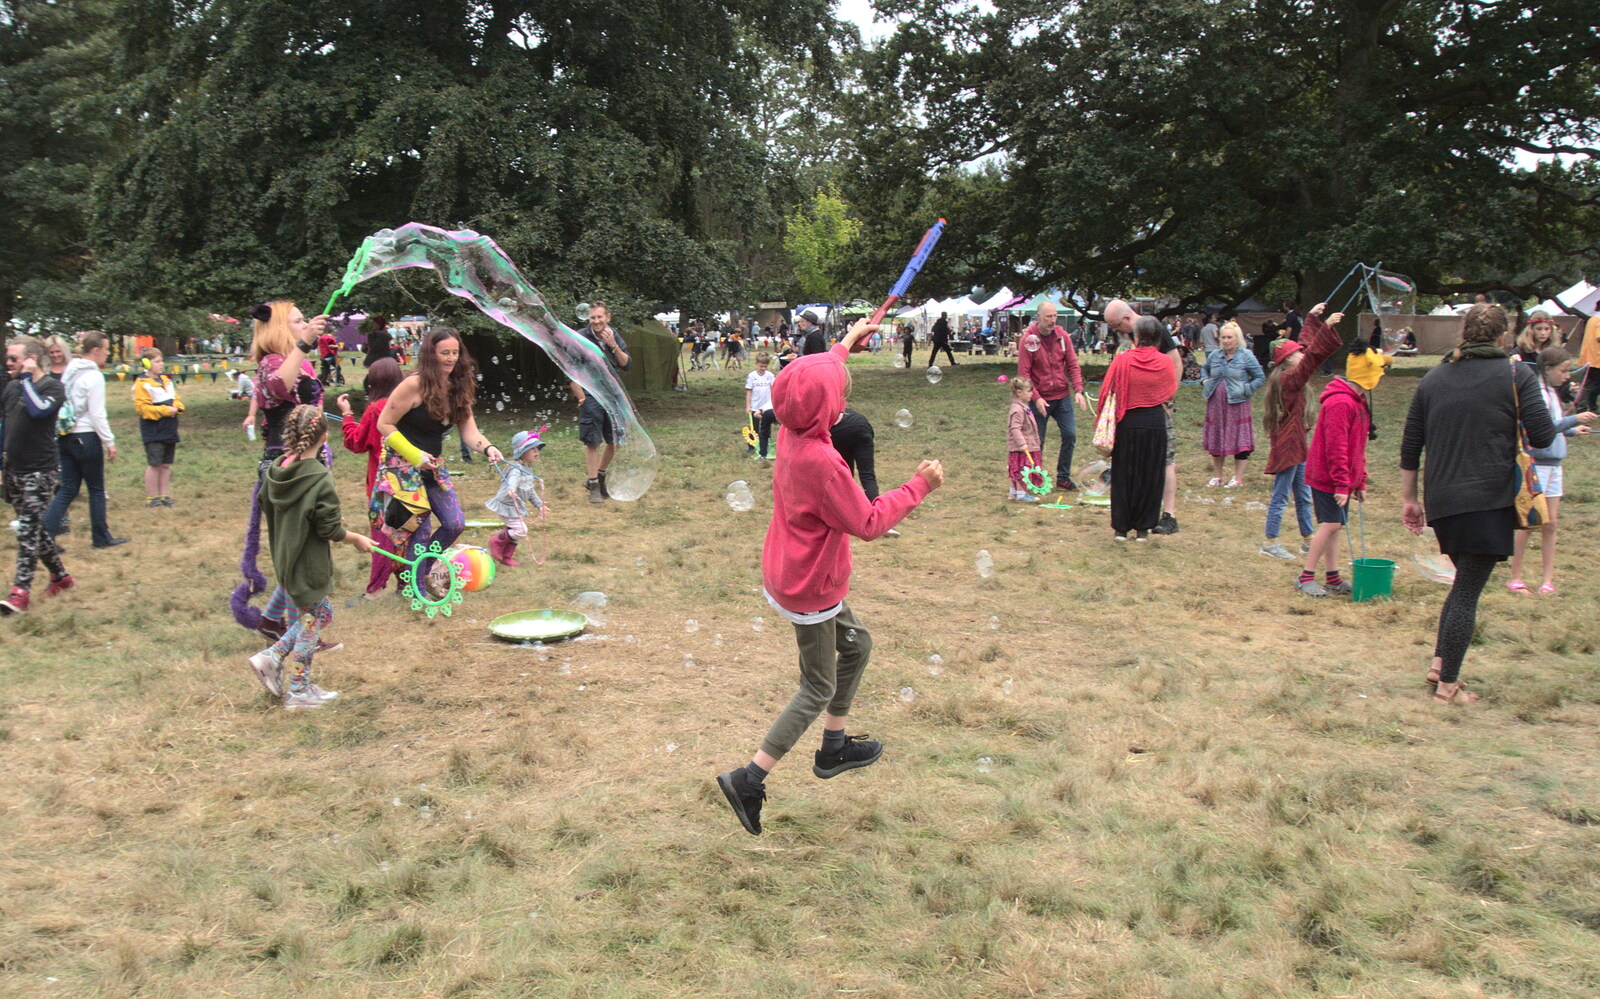 Harry leaps after bubbles from Maui Waui Festival, Hill Farm, Gressenhall, Norfolk - 28th August 2021